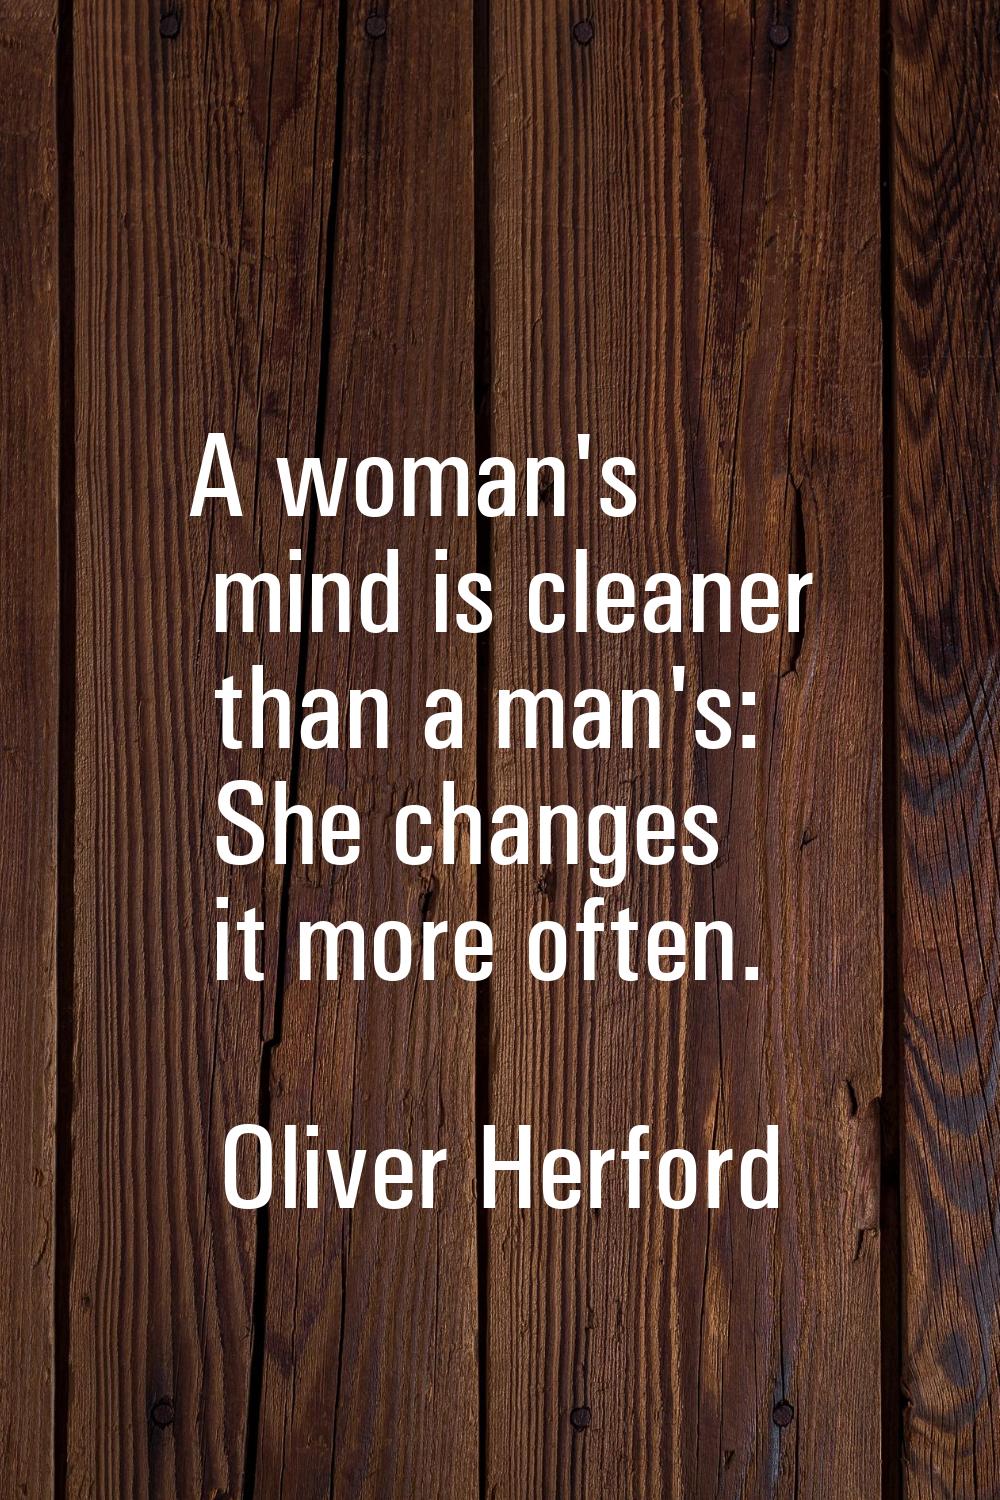 A woman's mind is cleaner than a man's: She changes it more often.